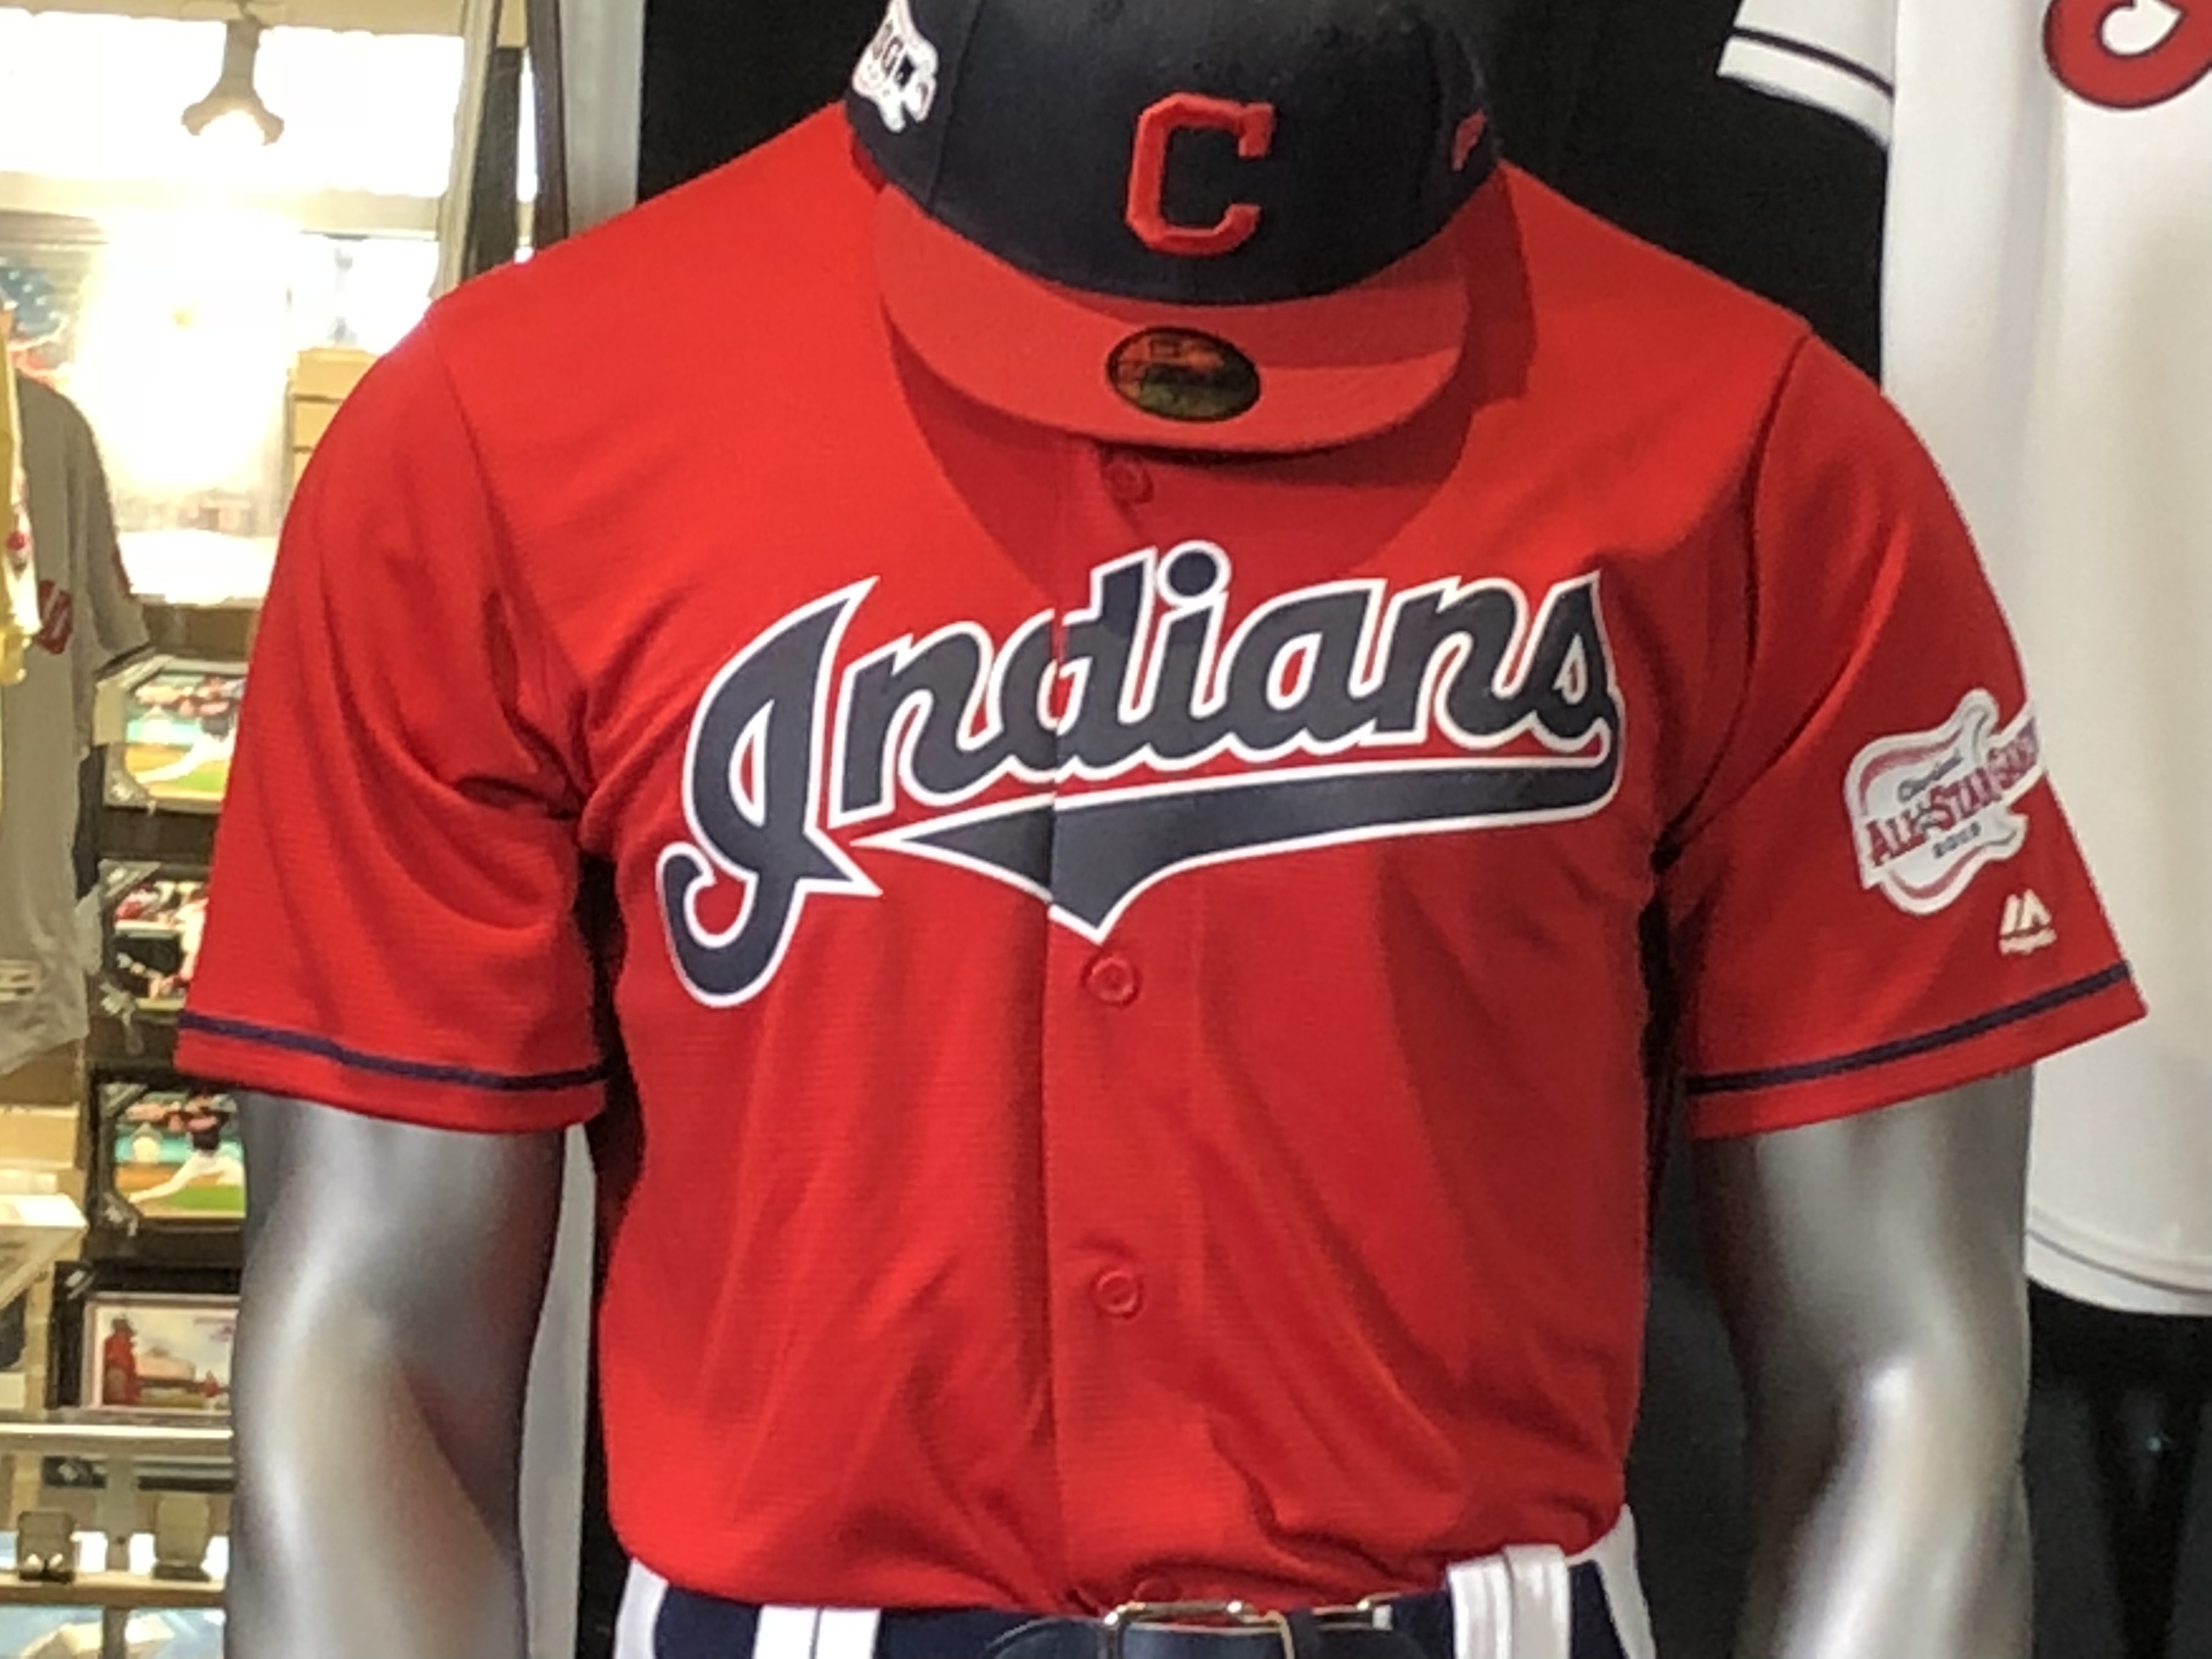 indians red jersey